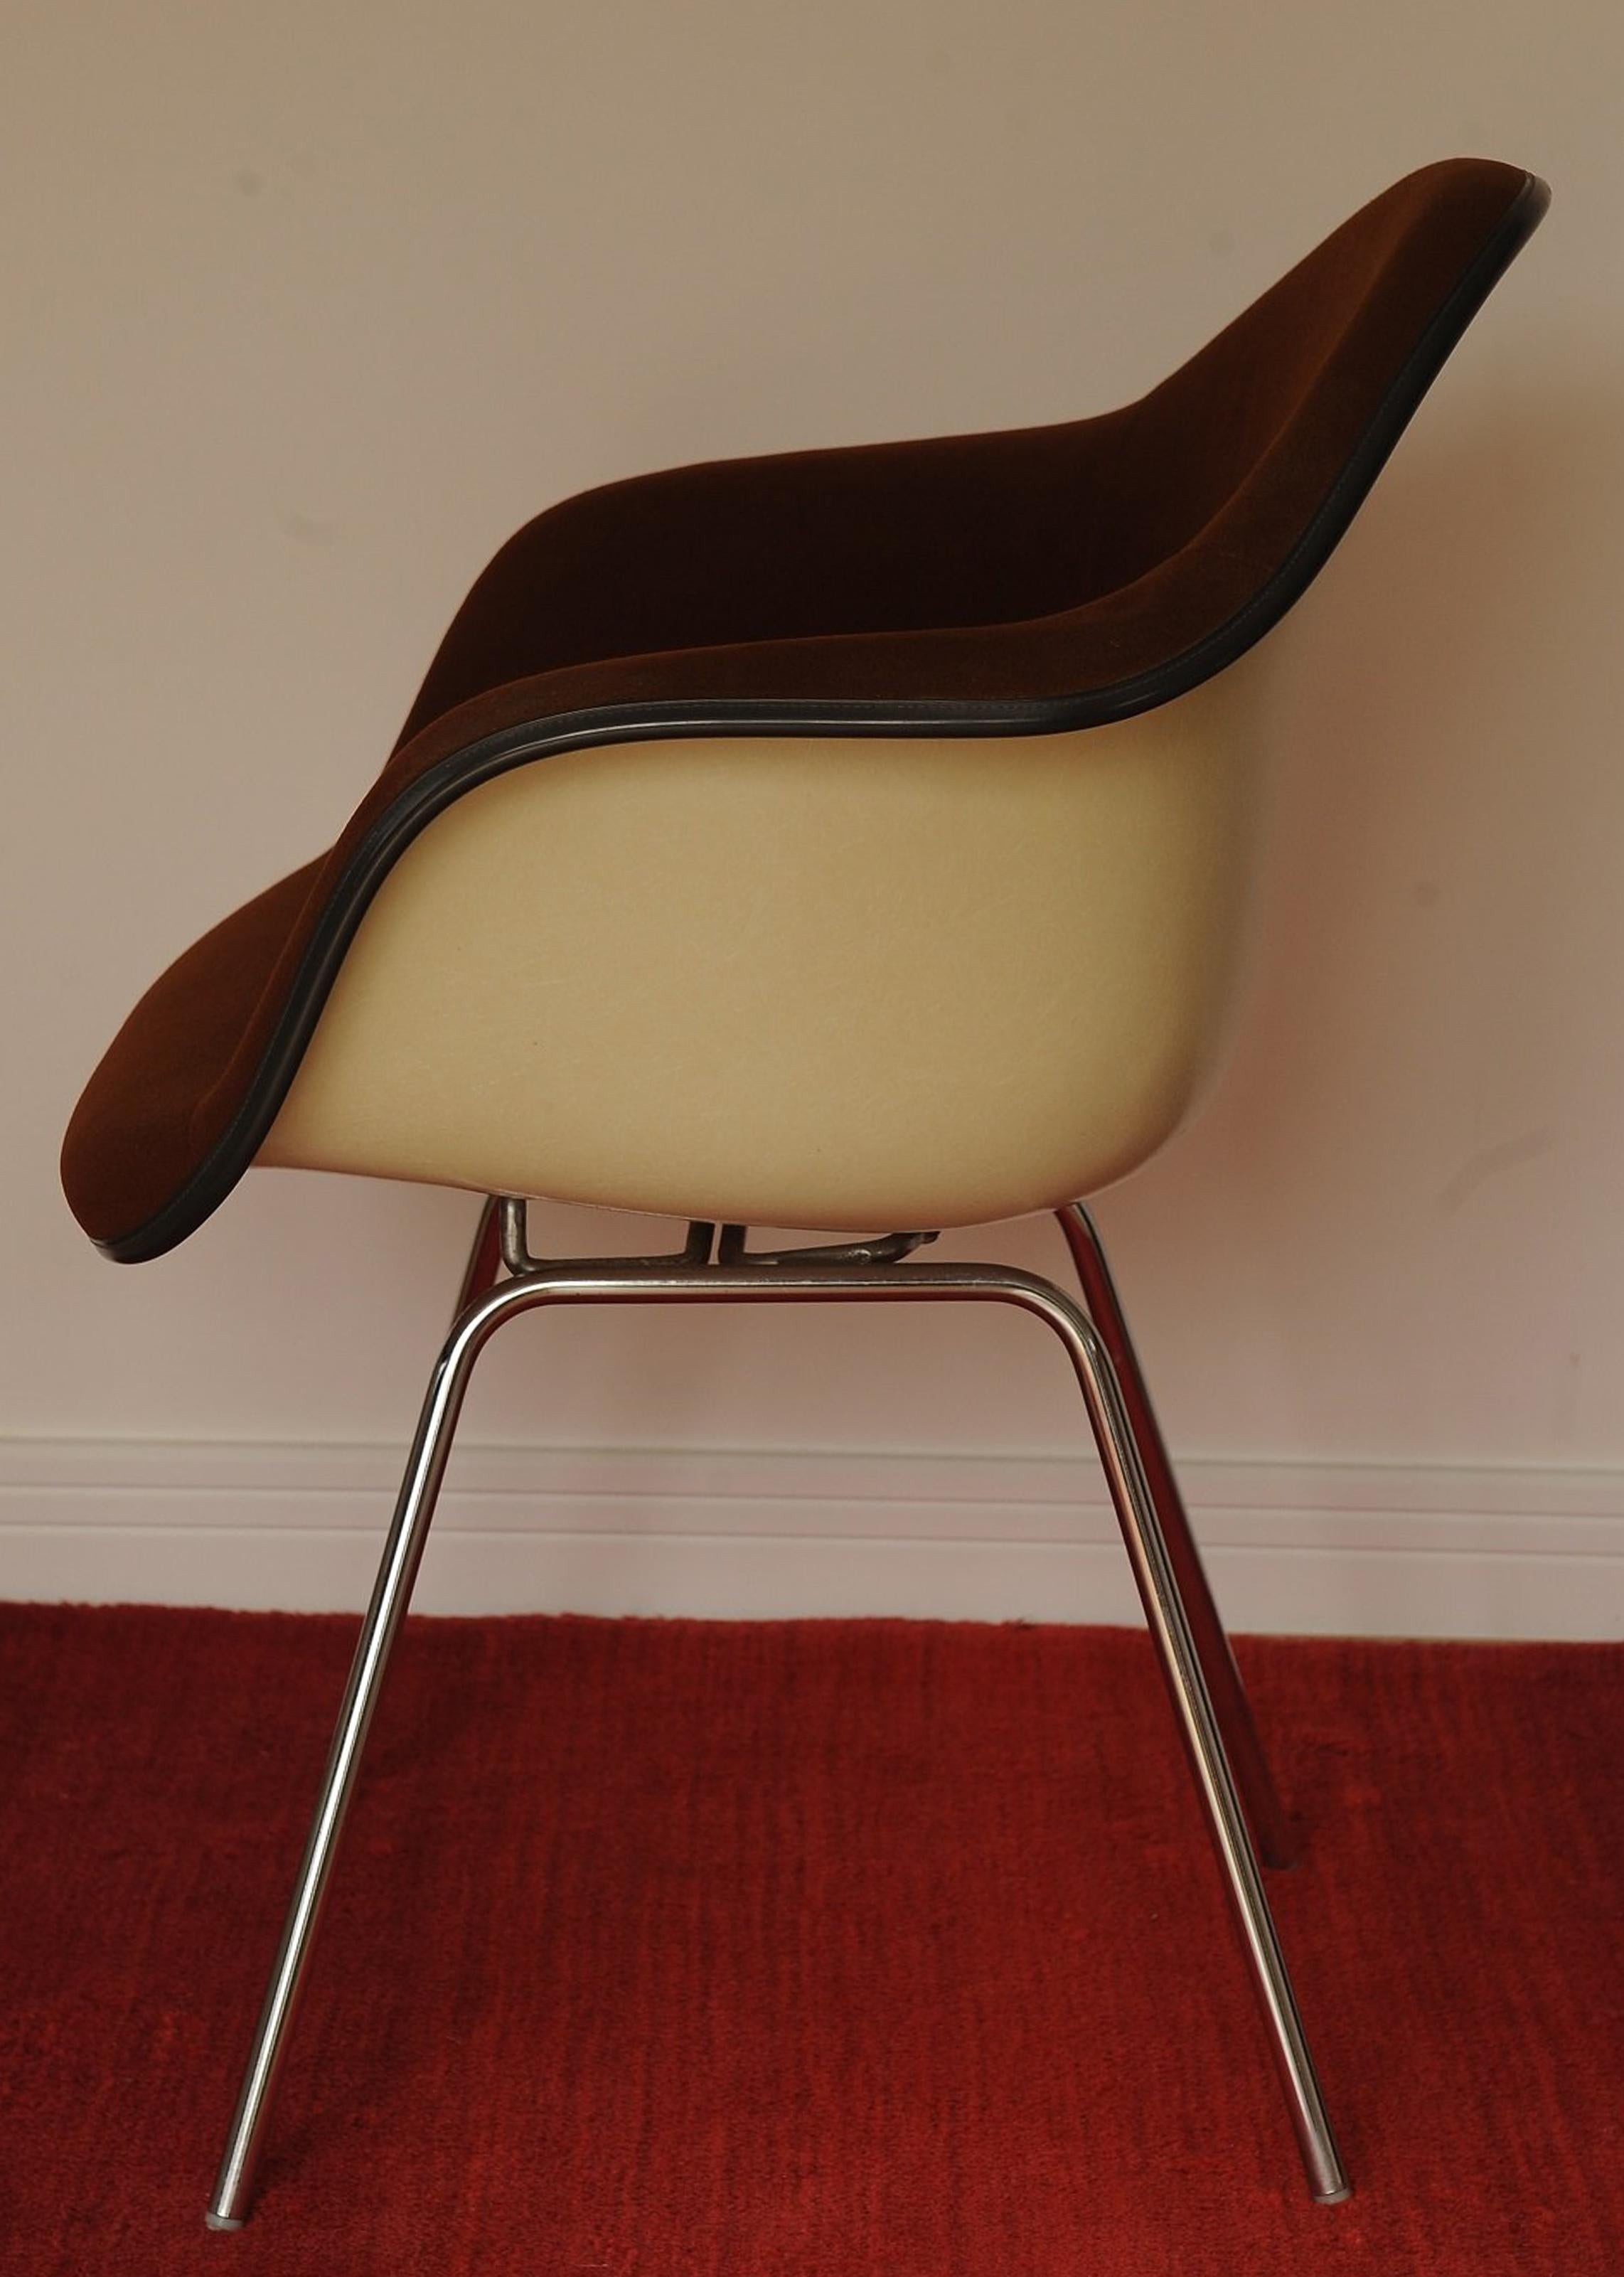 Original Iconic Mid Century Modern Charles & Ray Eames for Herman Miller DAX Chair Branding Under Chair 
Used for a desk or study, office chair or lounge 

Brand: Herman Miller I Designers: Charles & Ray Eames (Brand sticker underneath) Era: